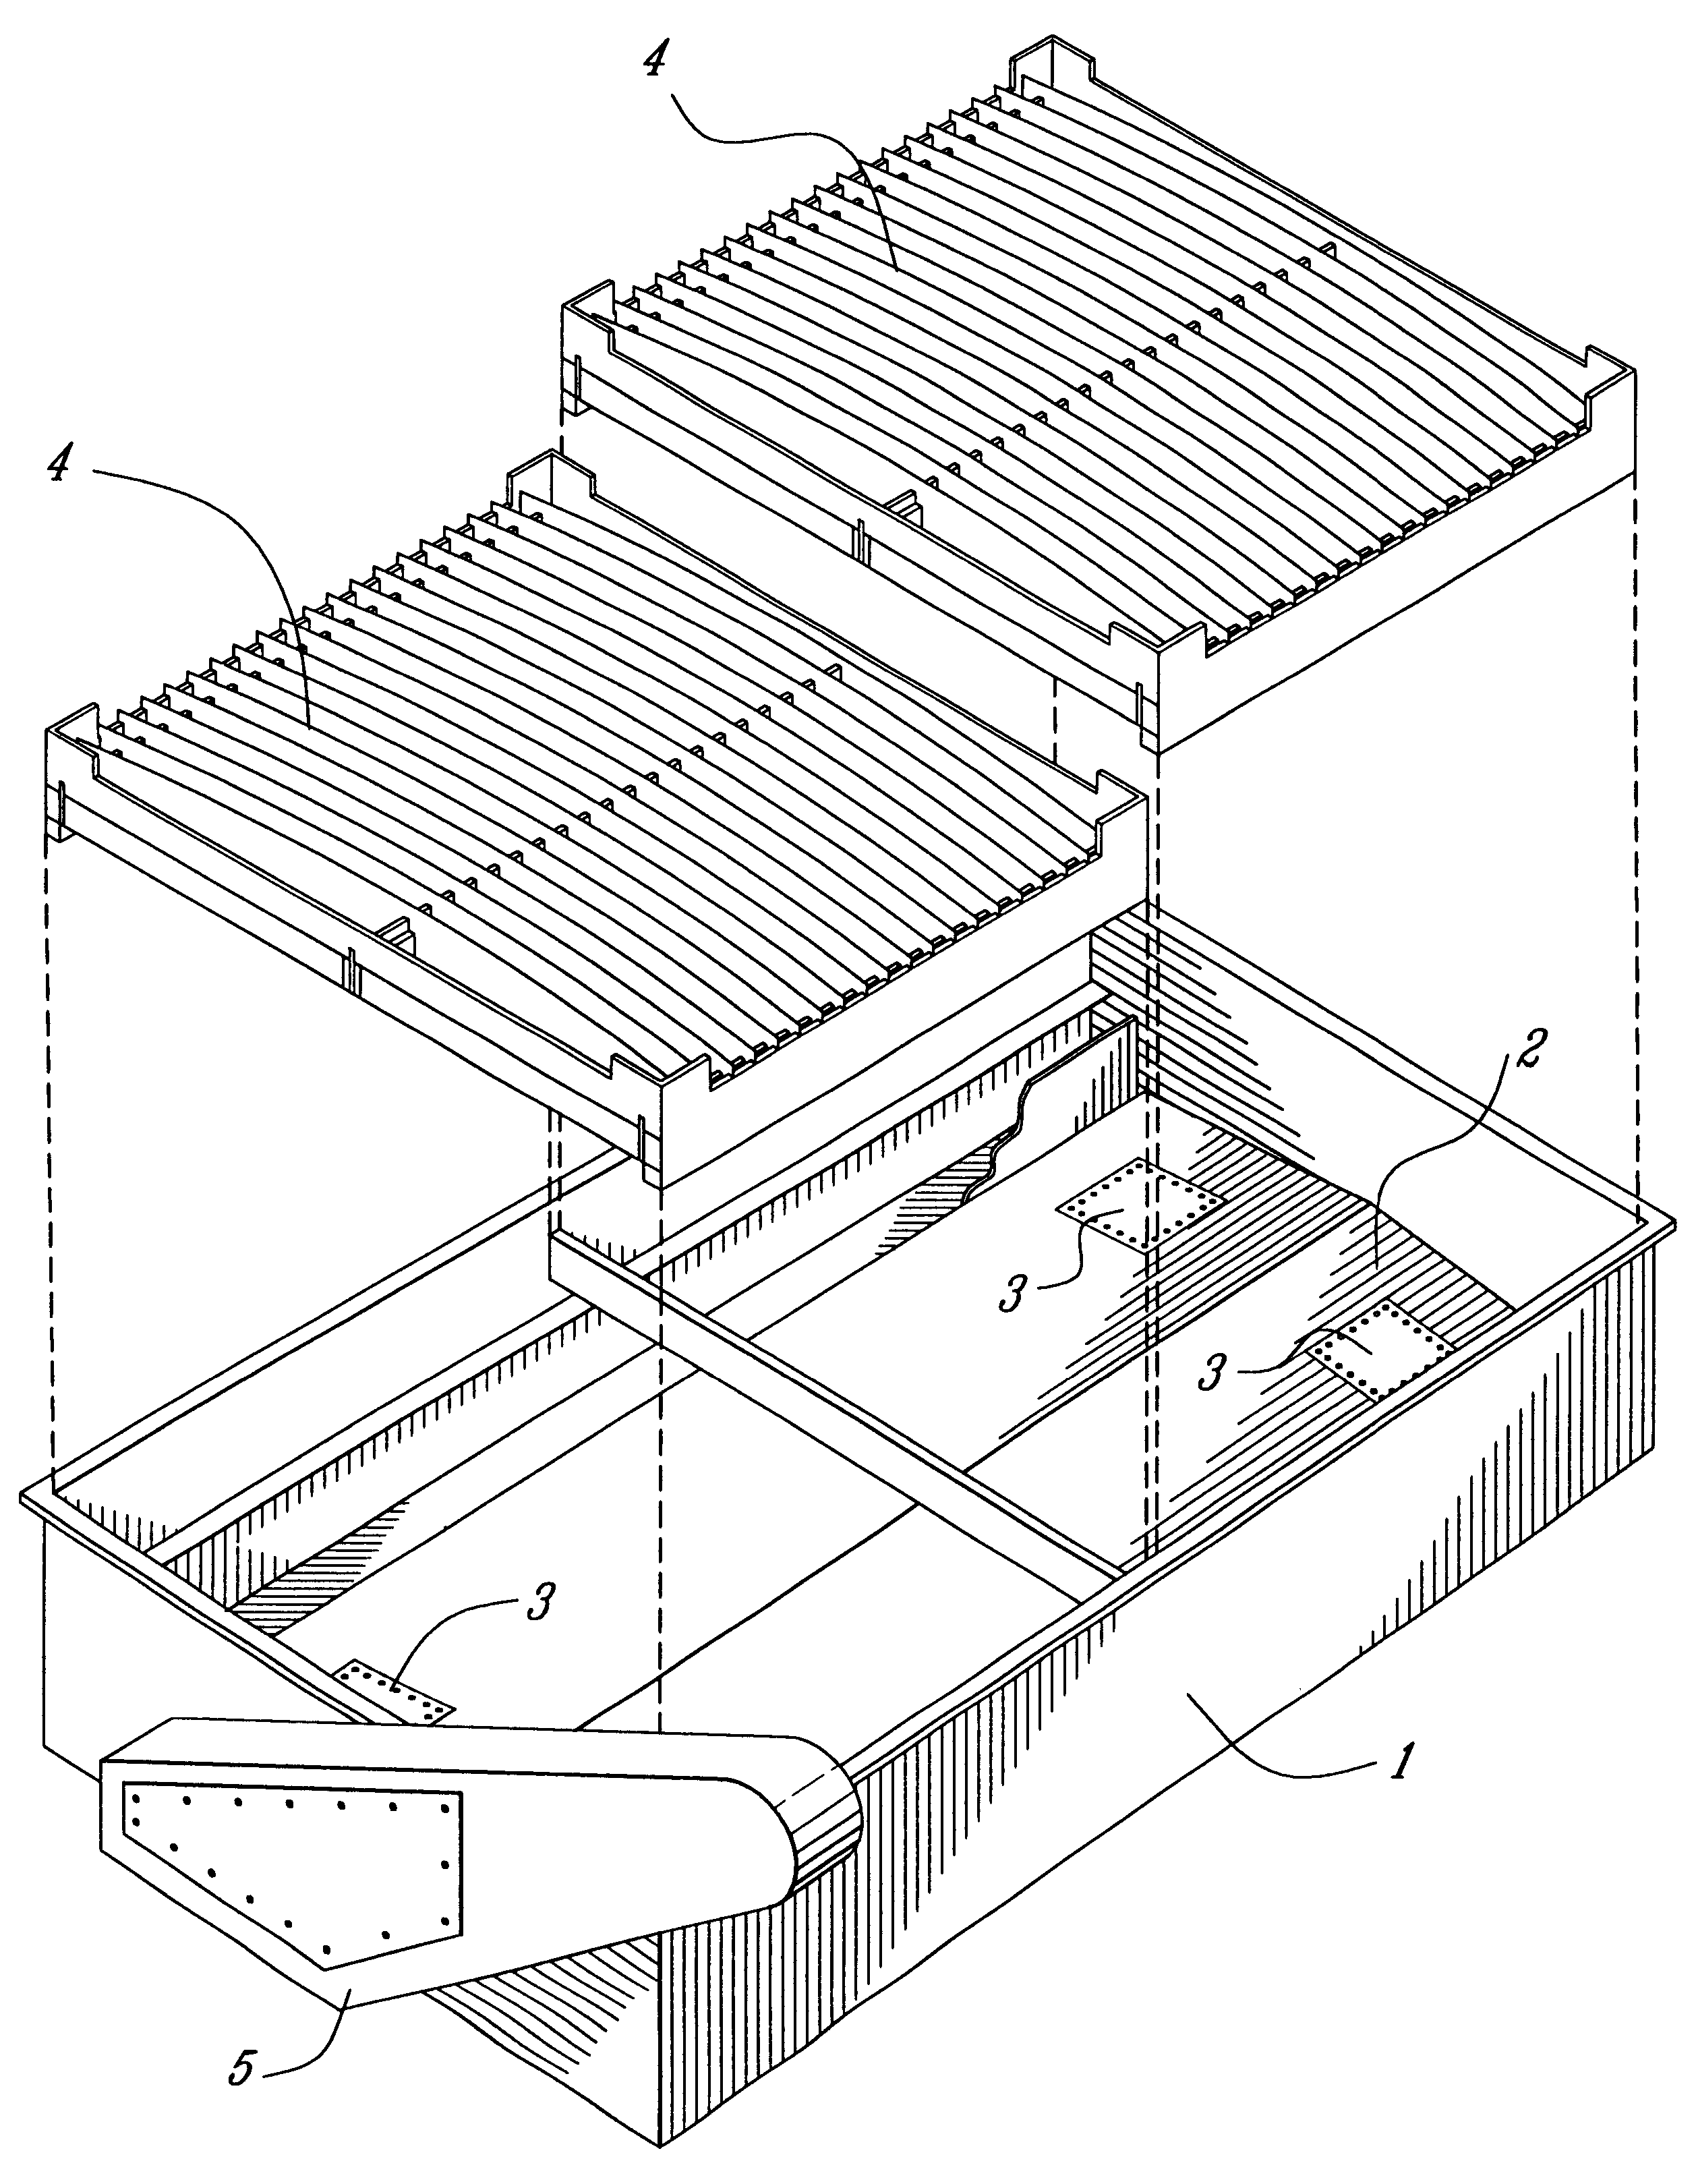 Water table with a system for modifying its interior volume and cleaning its water